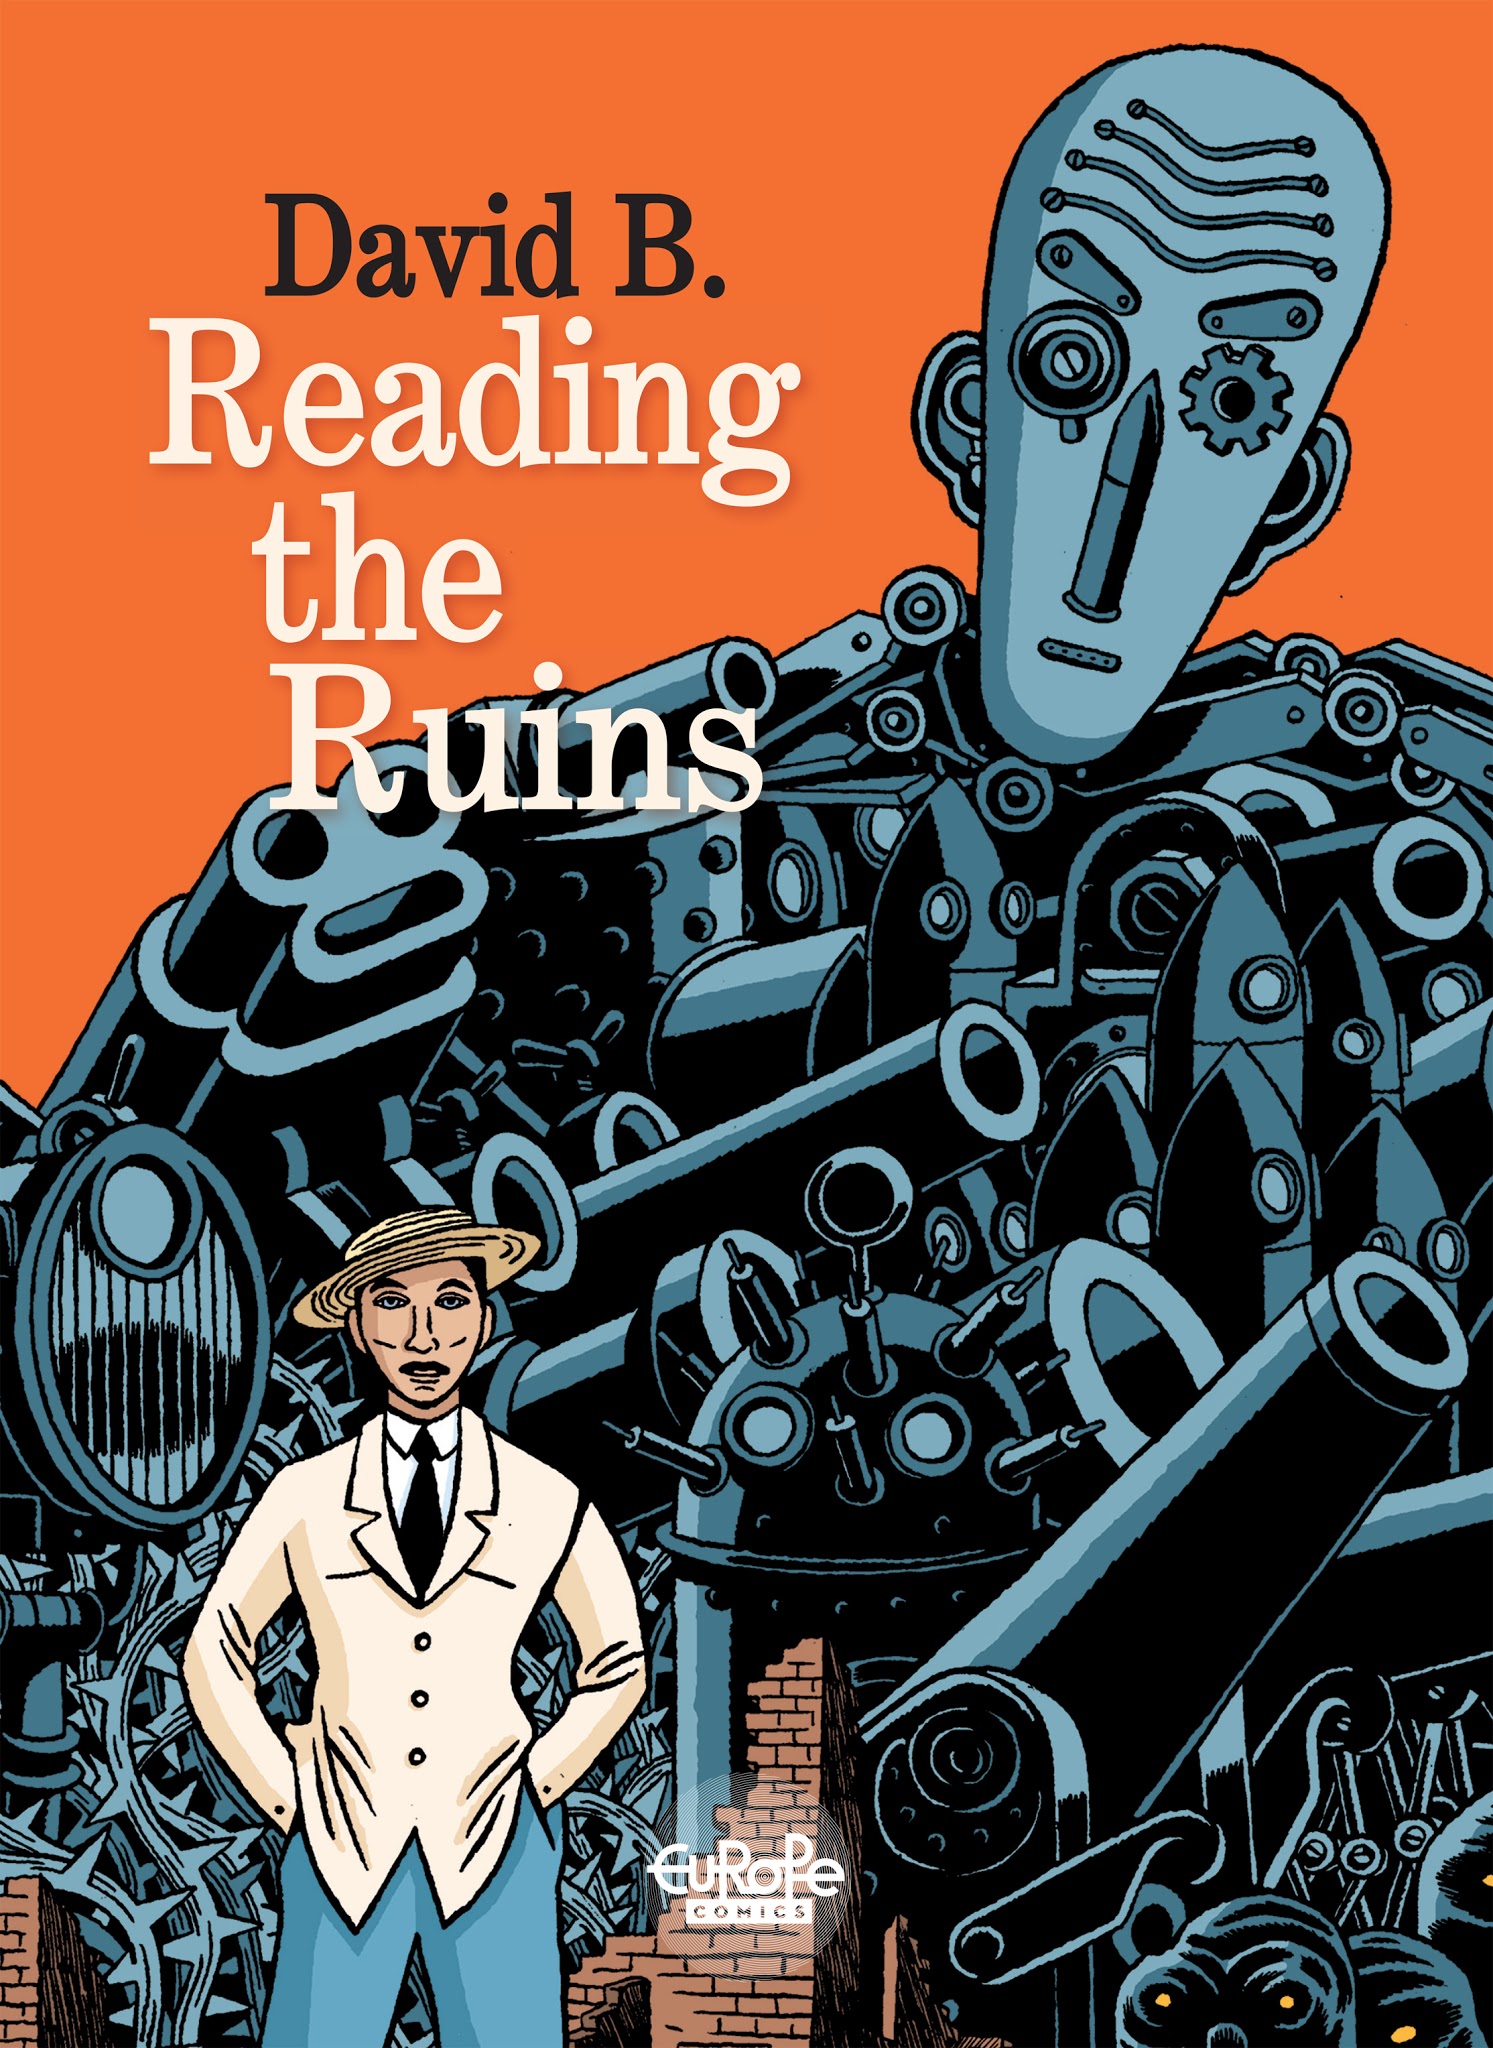 Read online Reading the Ruins comic -  Issue # TPB - 1